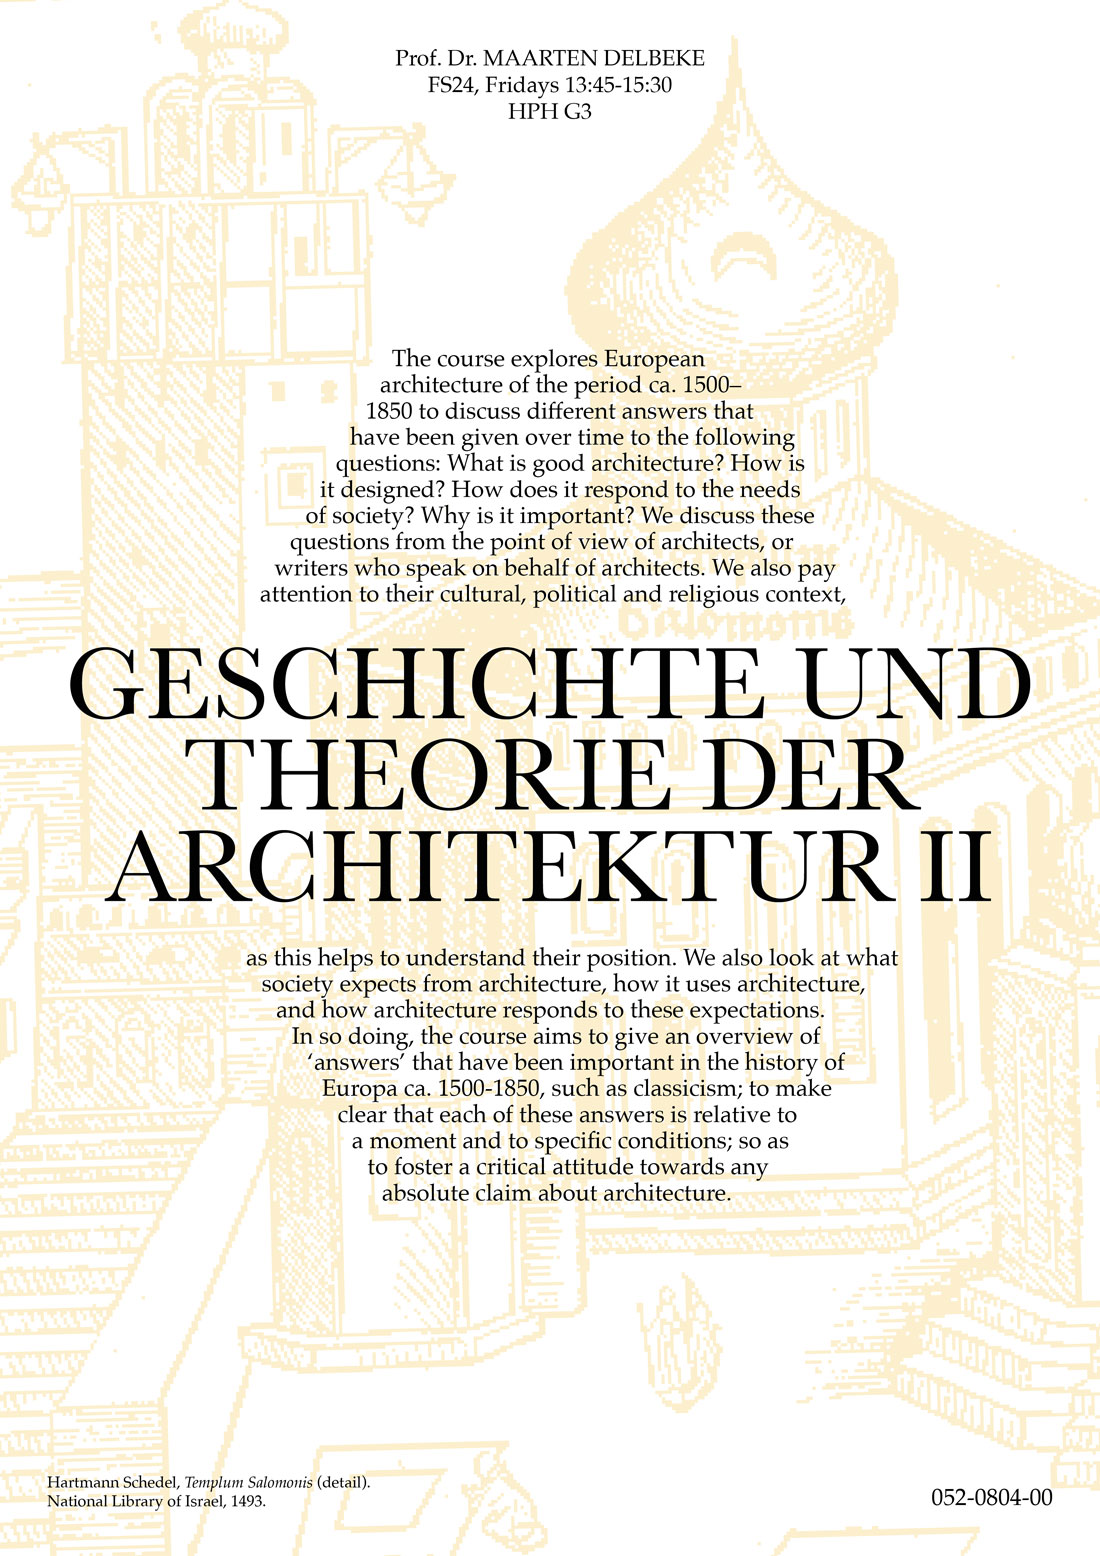 Poster for the course History and Theory of Architecture II with a background image inspired by a drawing imagining the Temple of Solomon